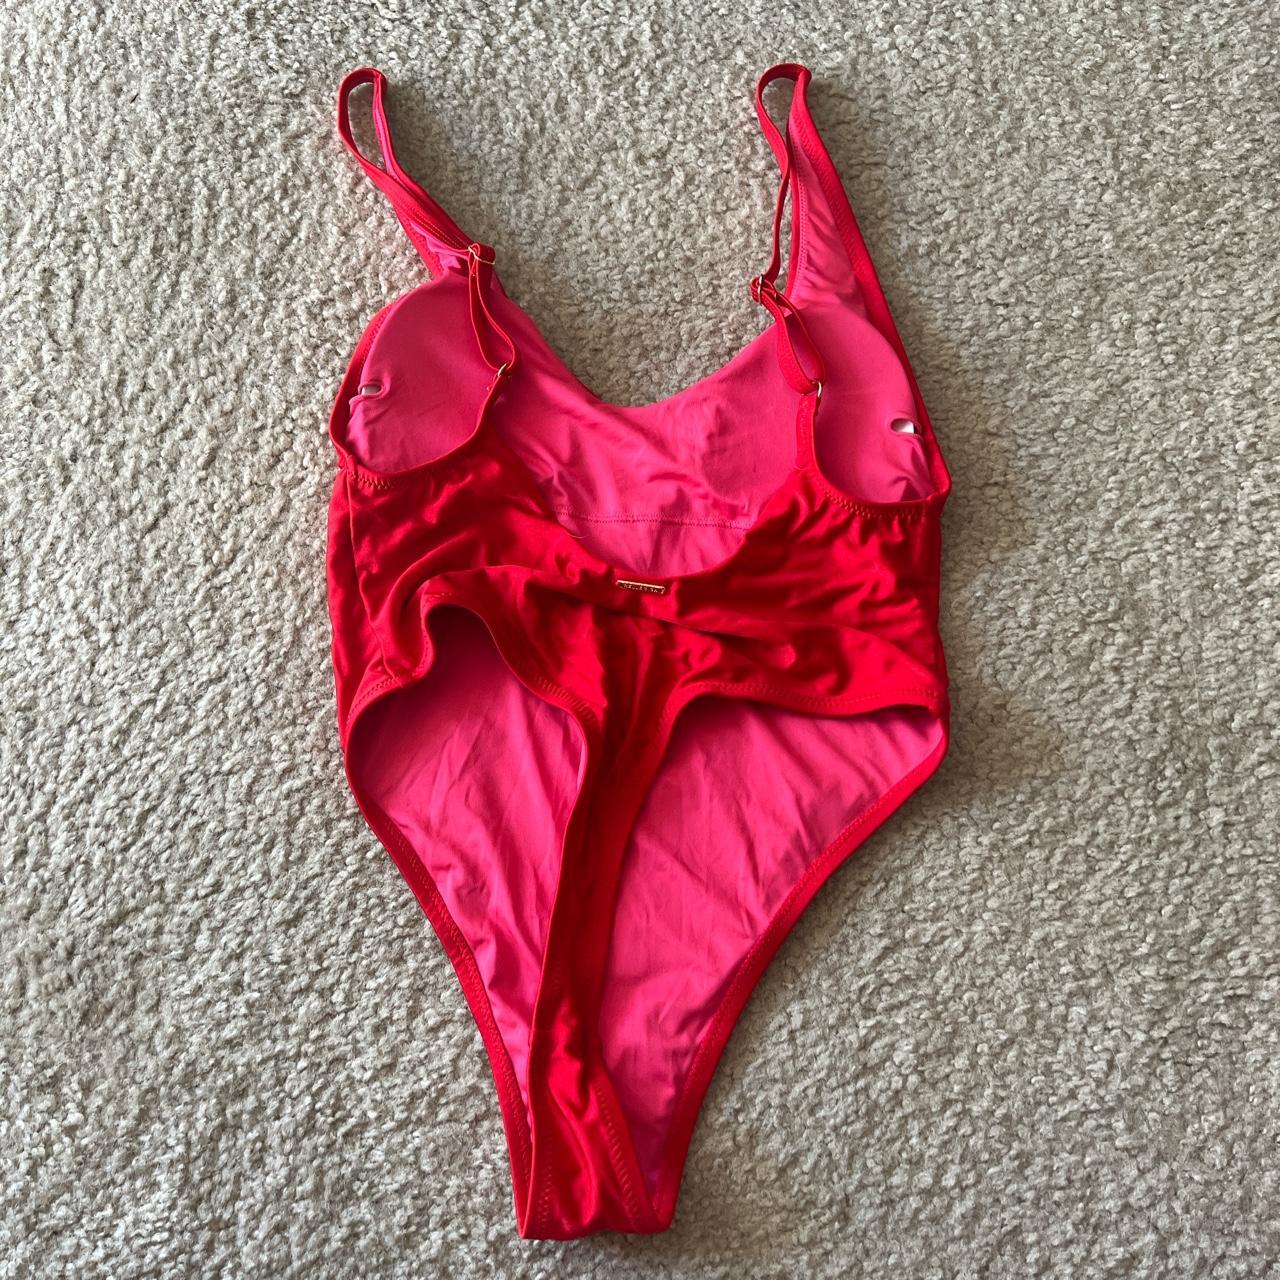 Pamela Anderson swimsuit worn once for photos has... - Depop